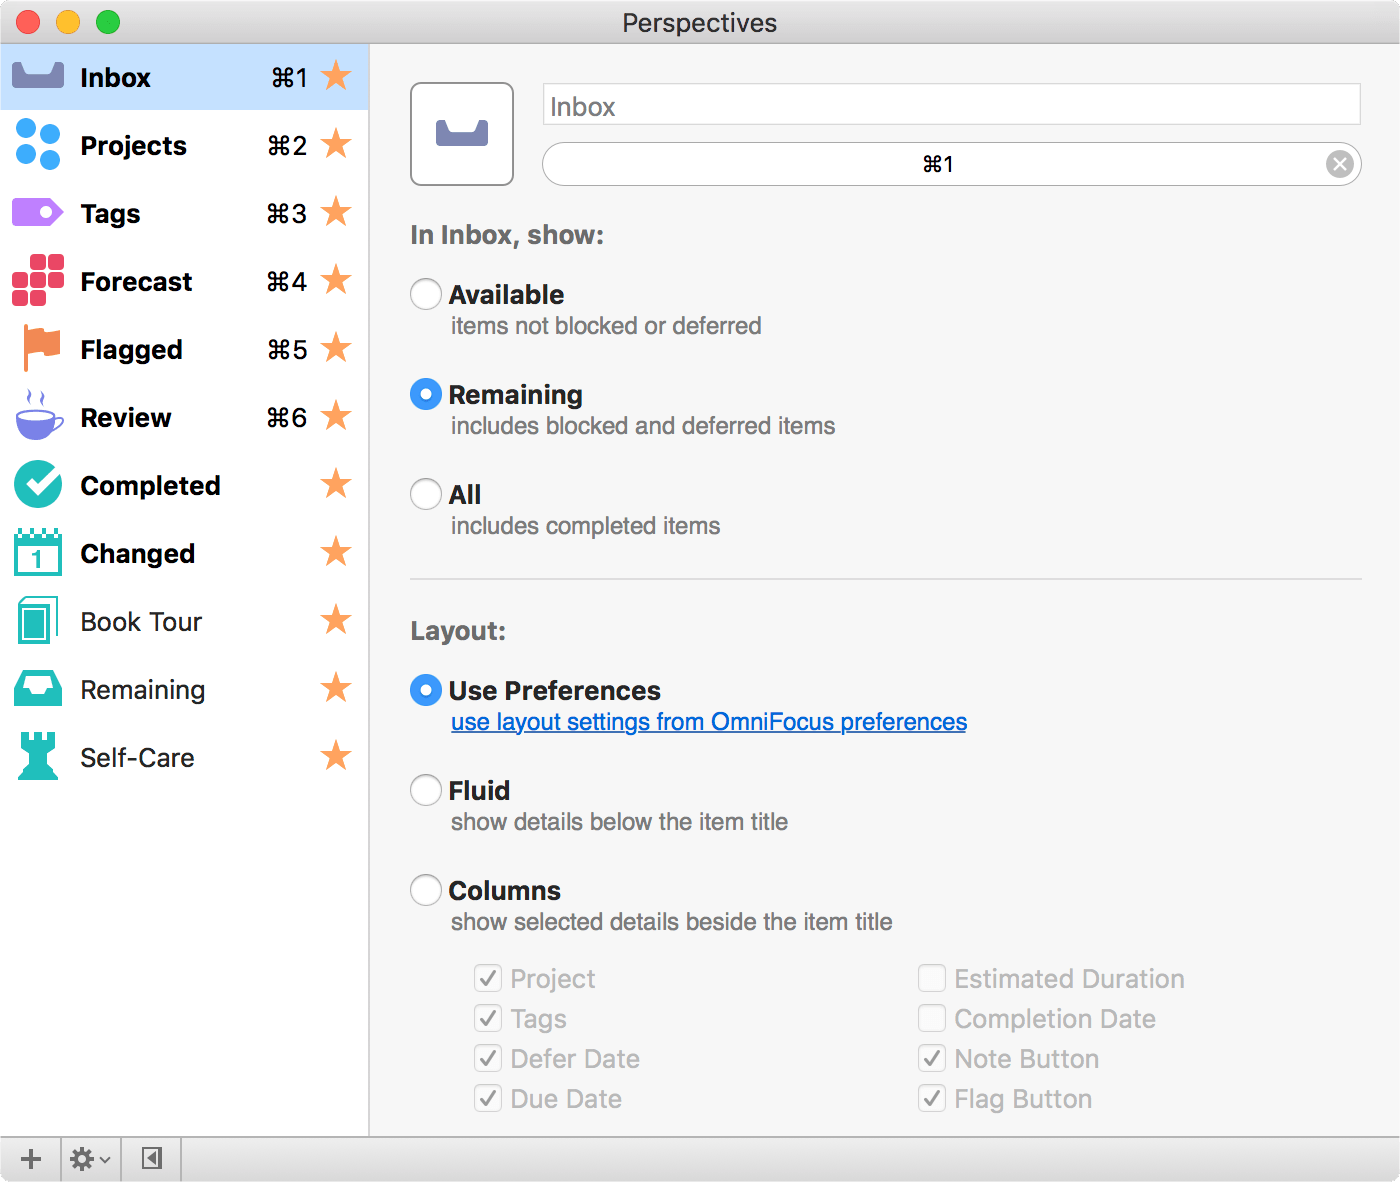 The Perspectives window in OmniFocus Pro, with the built-in Inbox perspective selected.